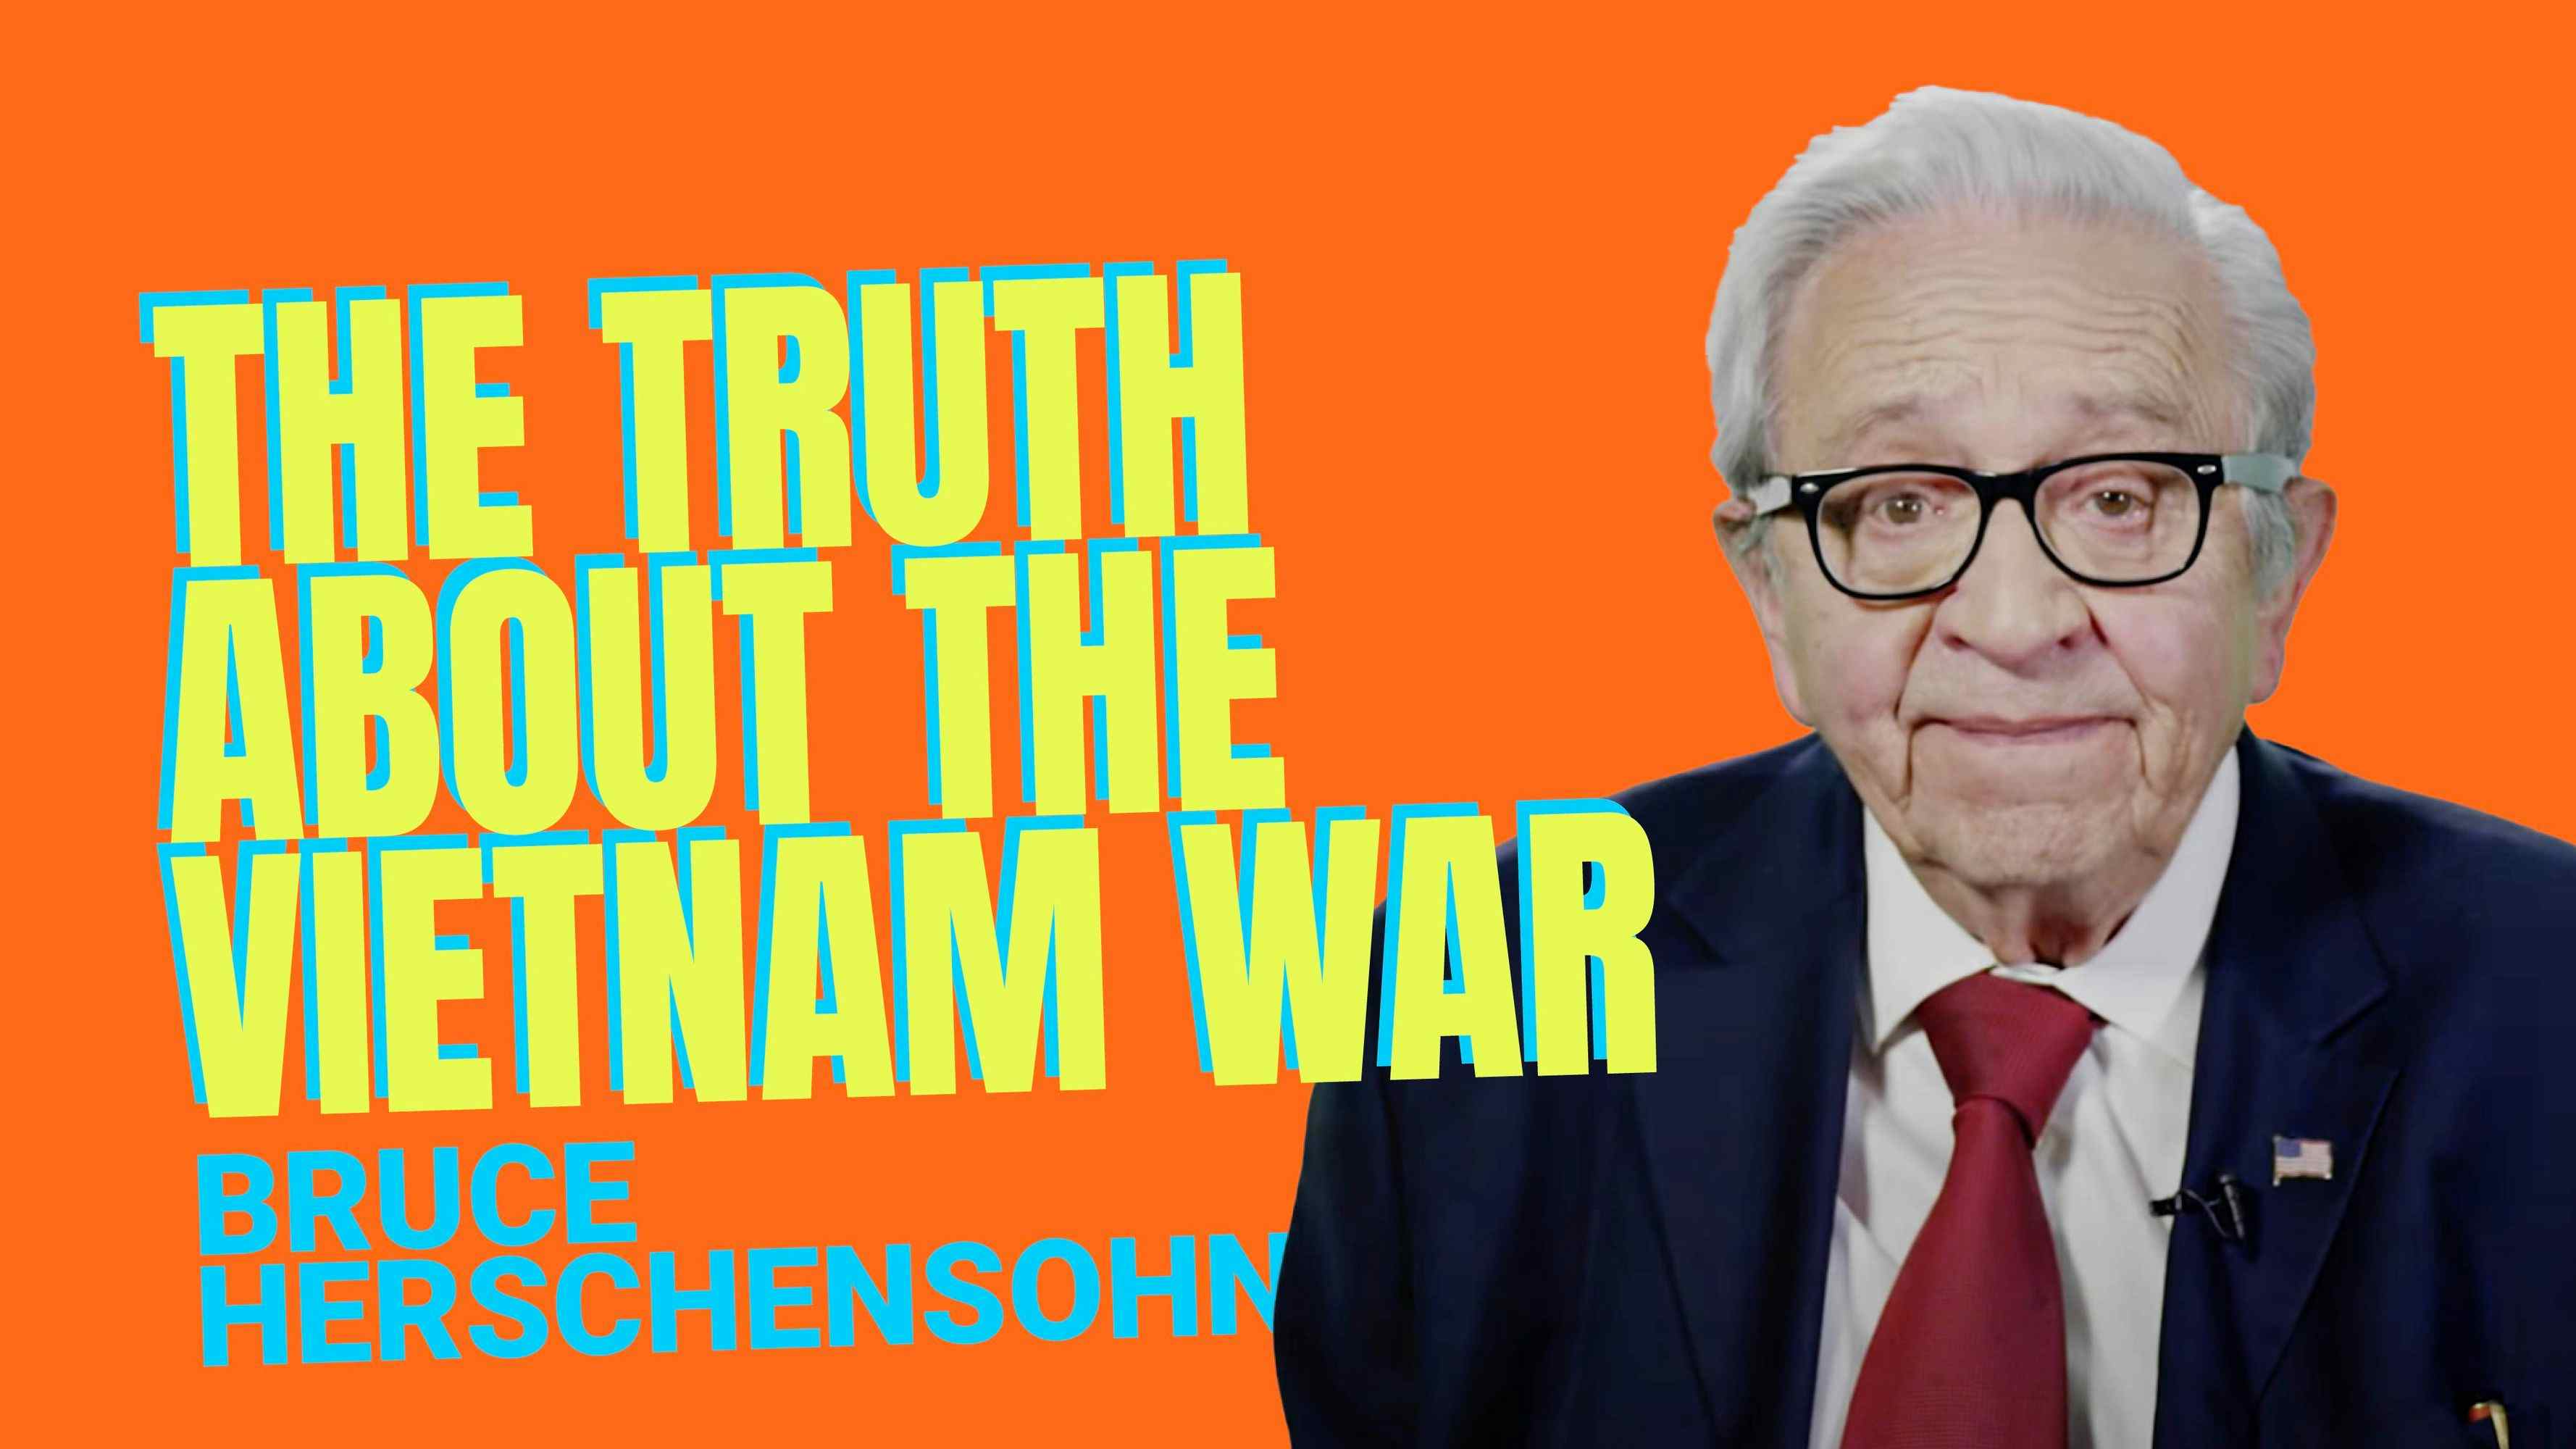 The Truth about the Vietnam War